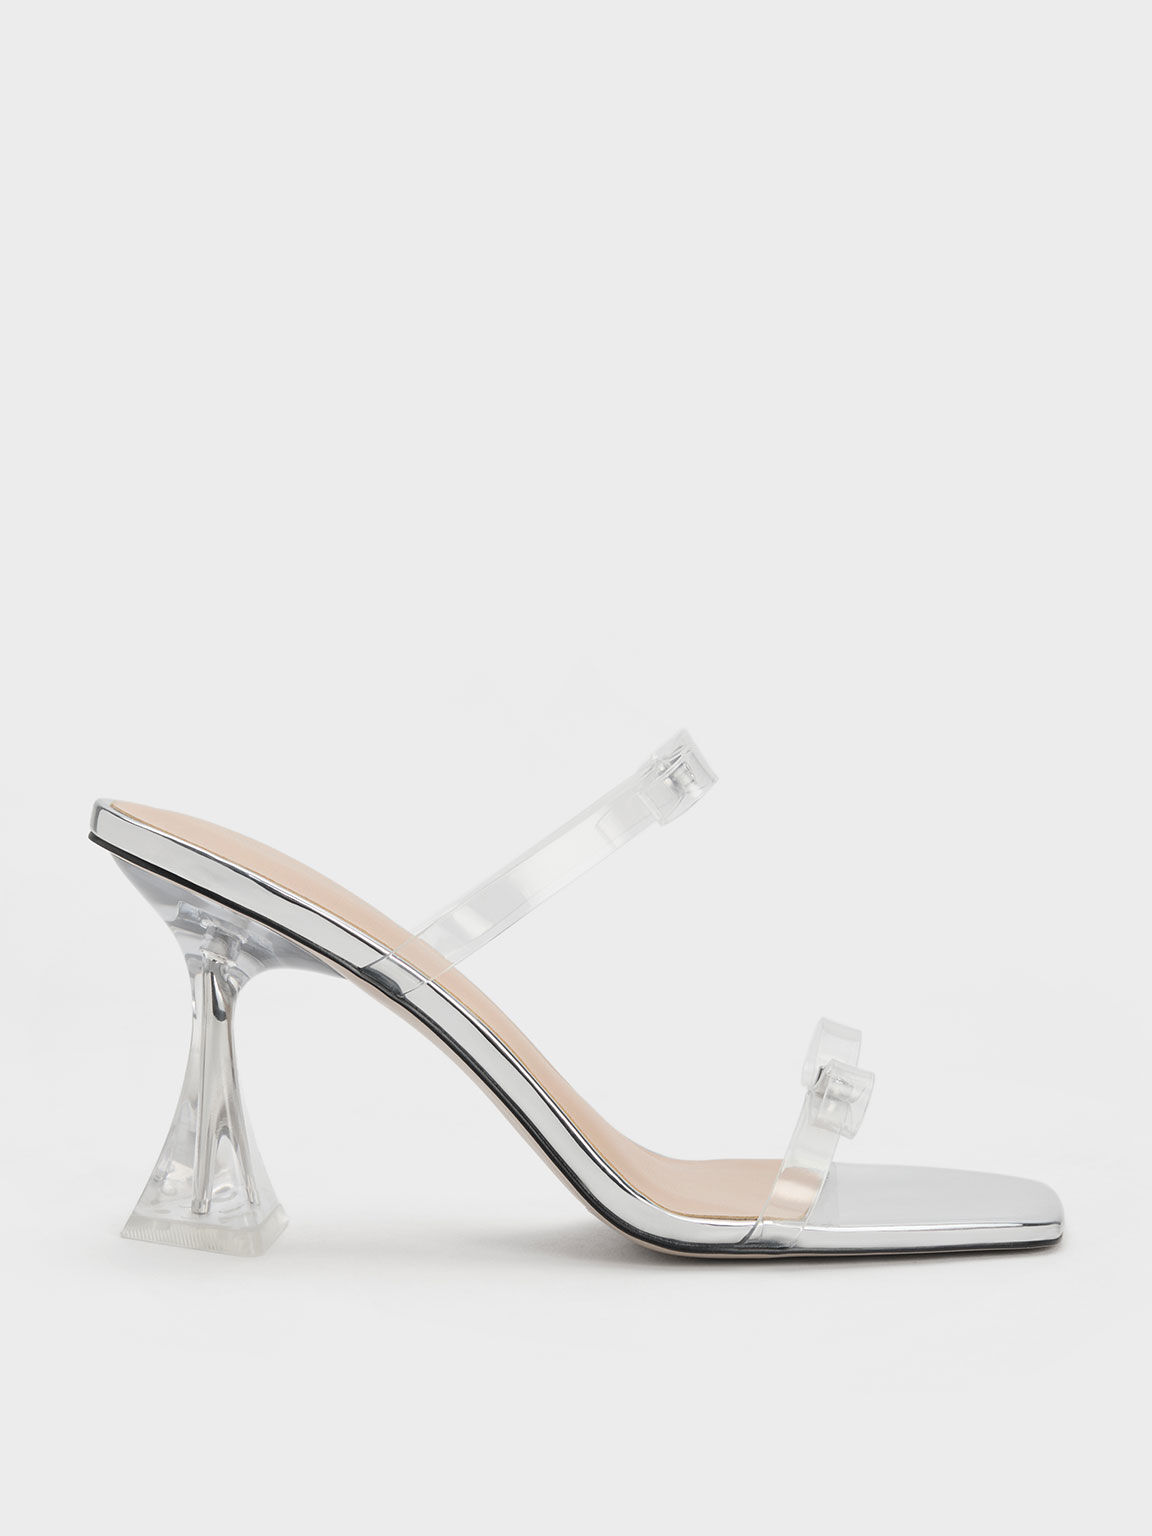 Embellished Bow See-Through Sandals, Silver, hi-res